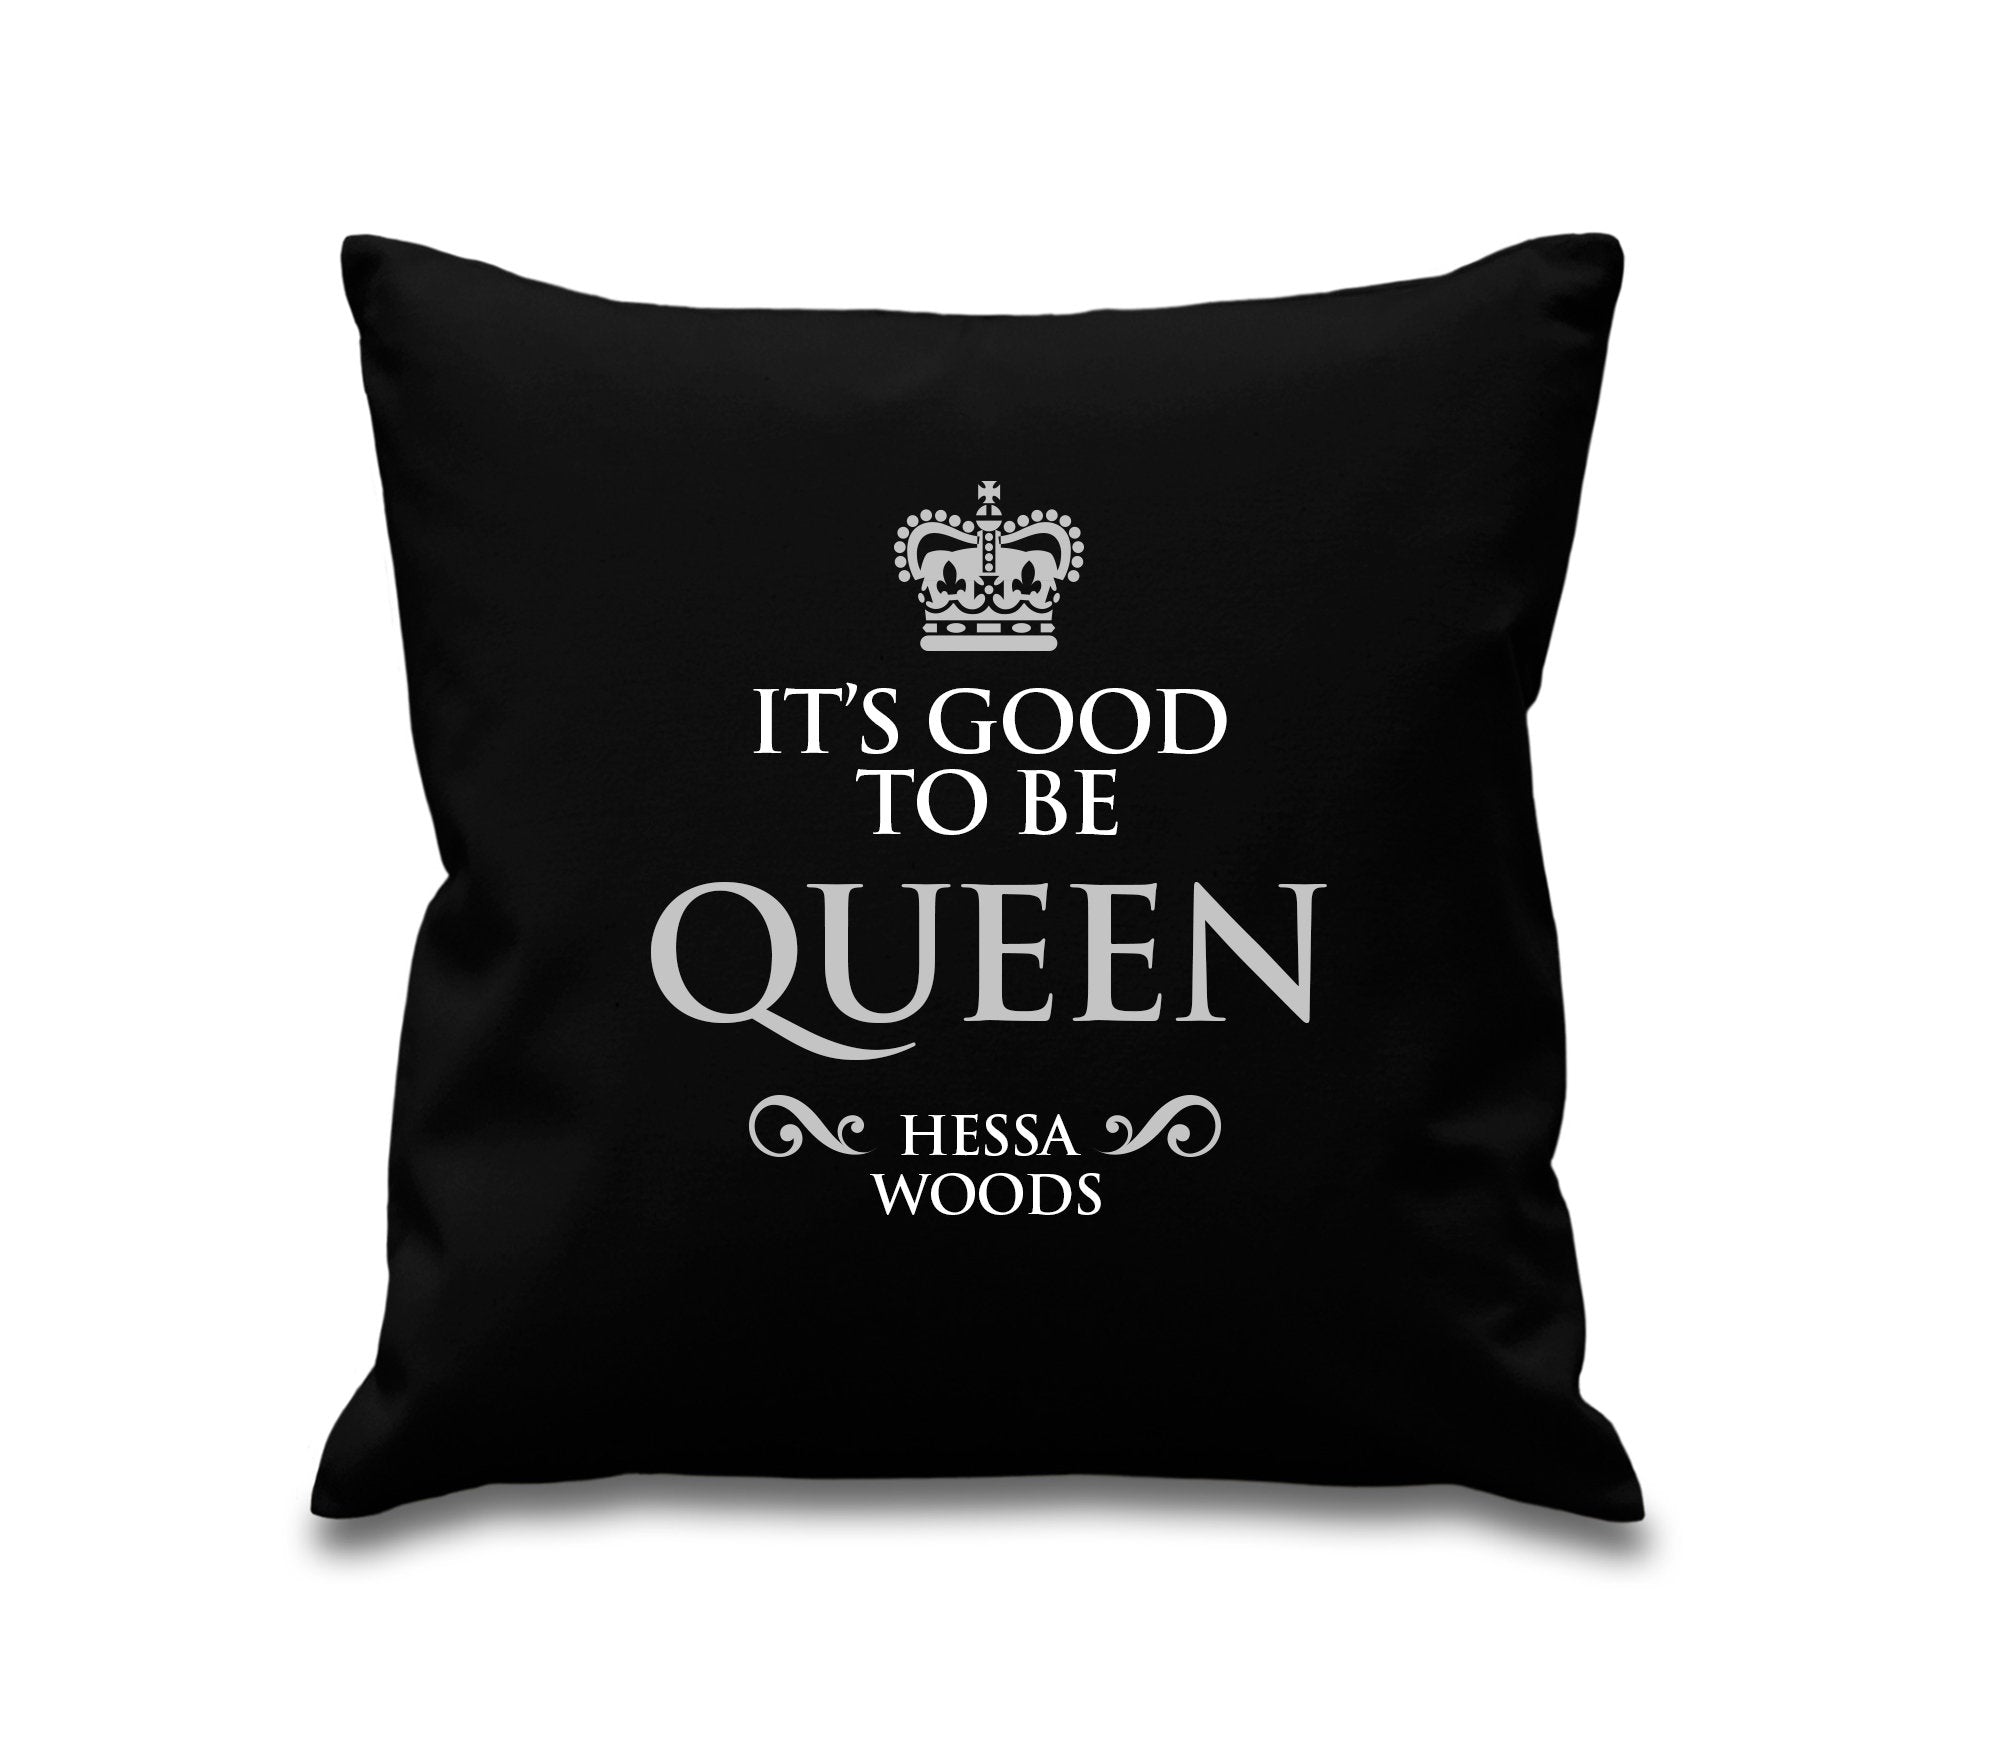 Personalised 'Its Good to be Queen' Cotton Cushion Cover